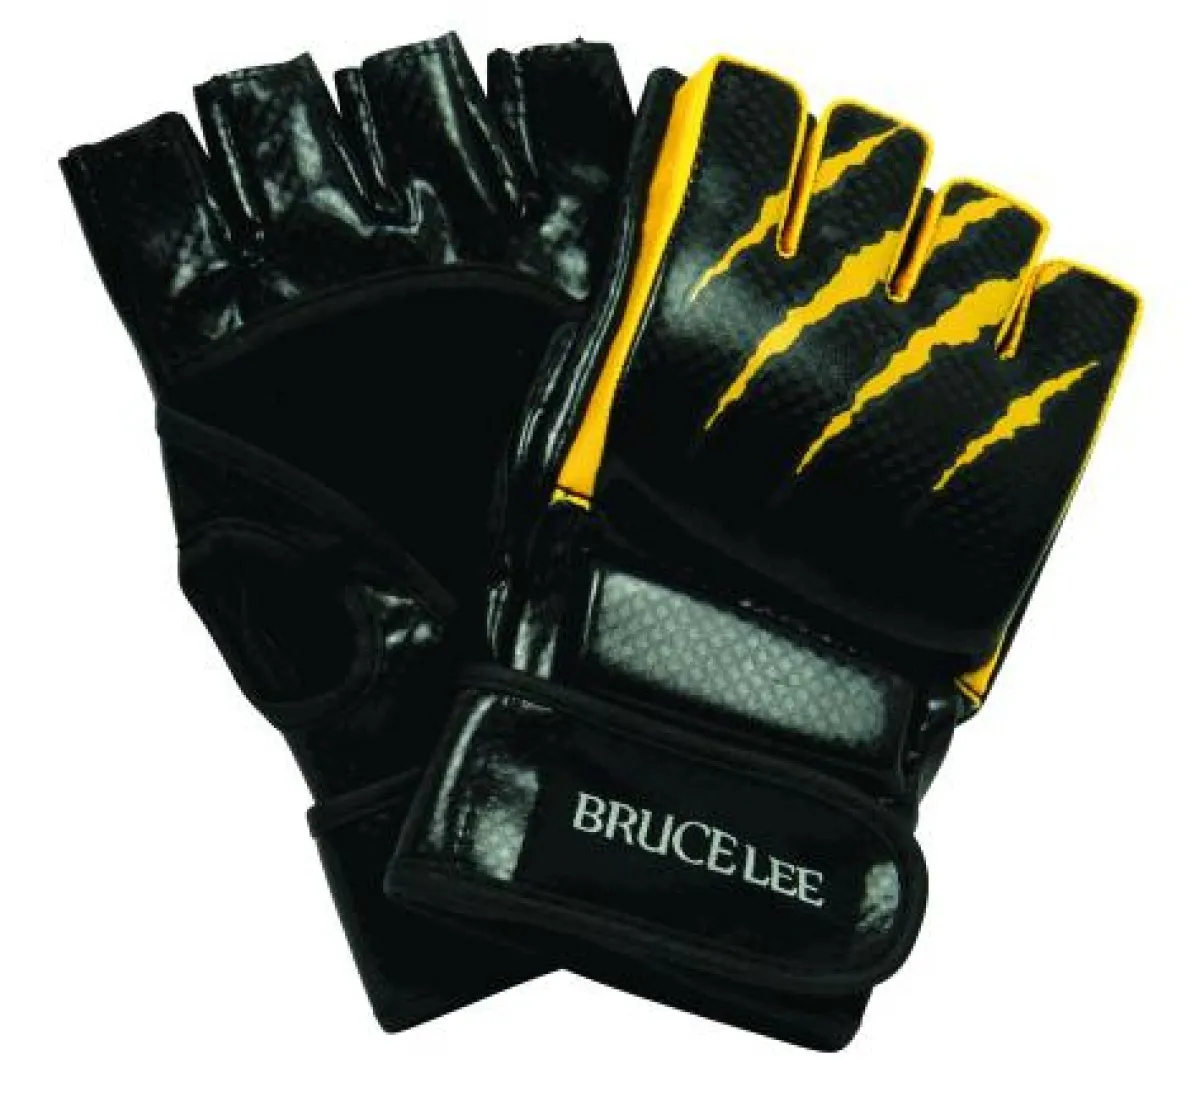 Bruce Lee Signature MMA / Grappling Gloves